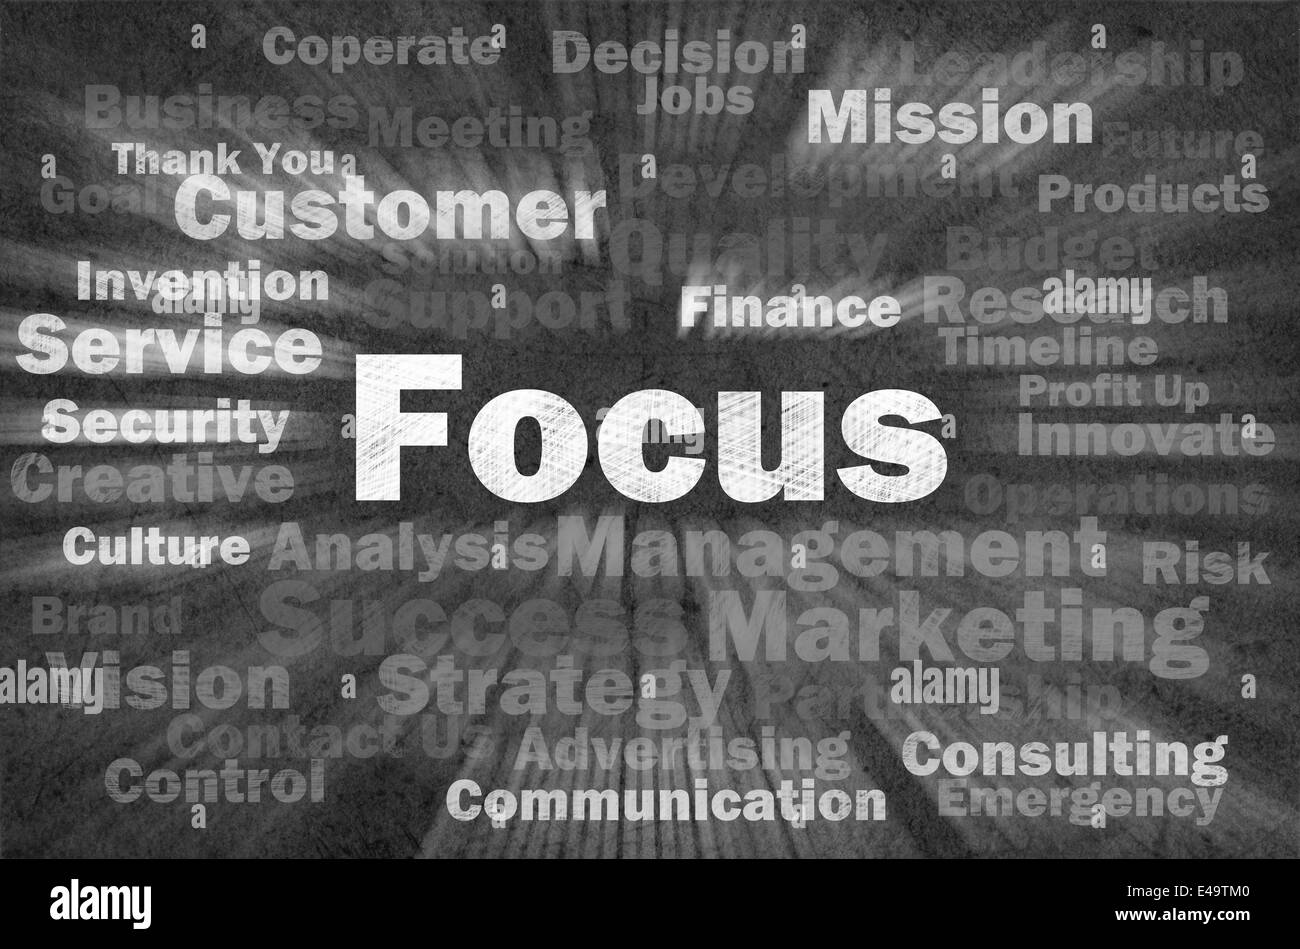 Focus concept with other related words Stock Photo